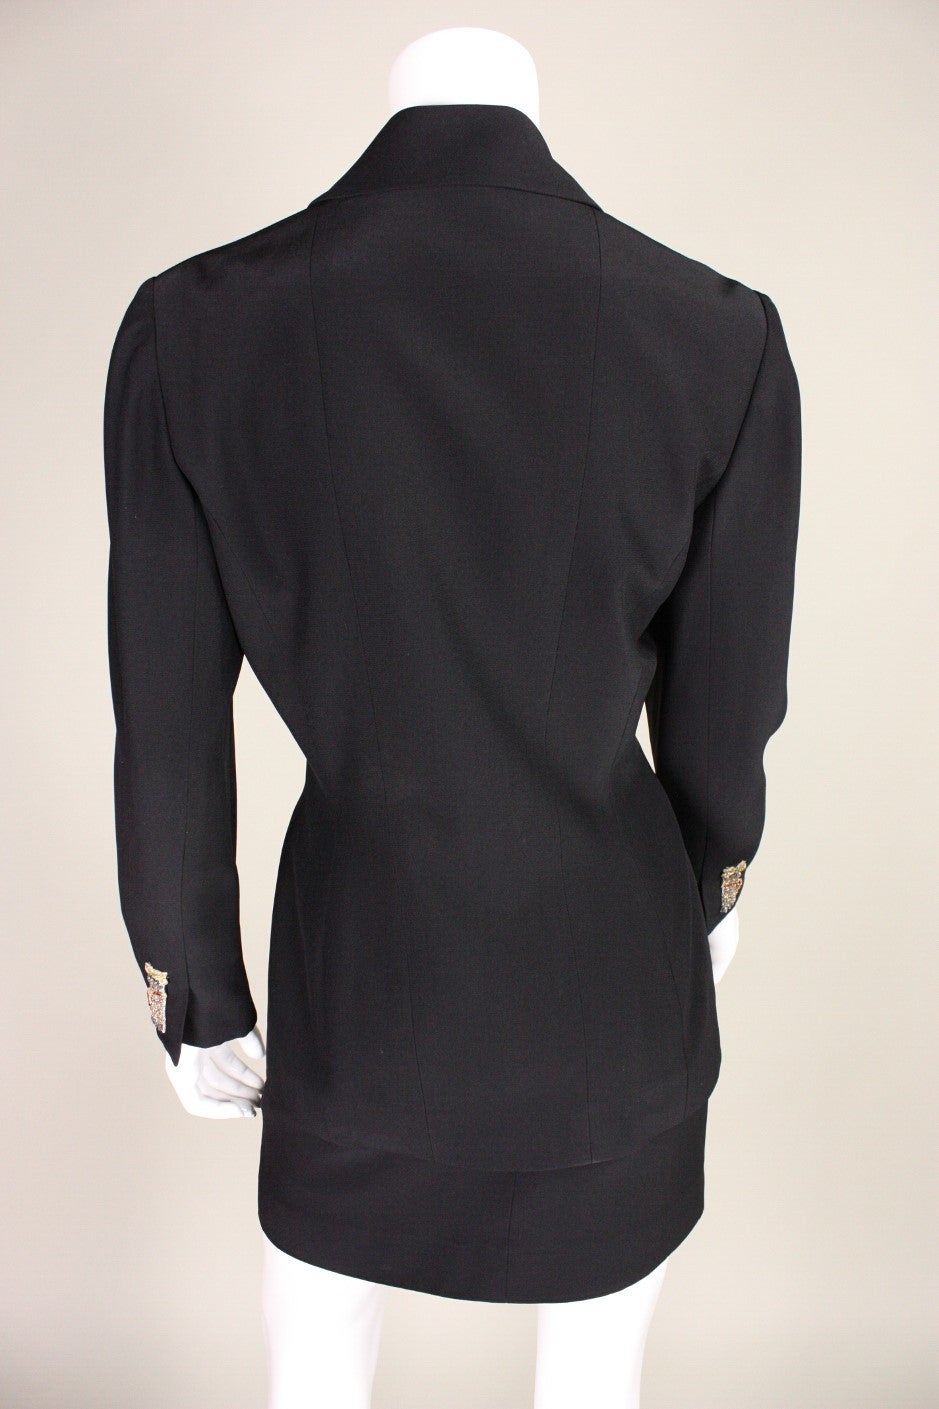 Women's Karl Lagerfeld Embellished Suit, 1990s  For Sale